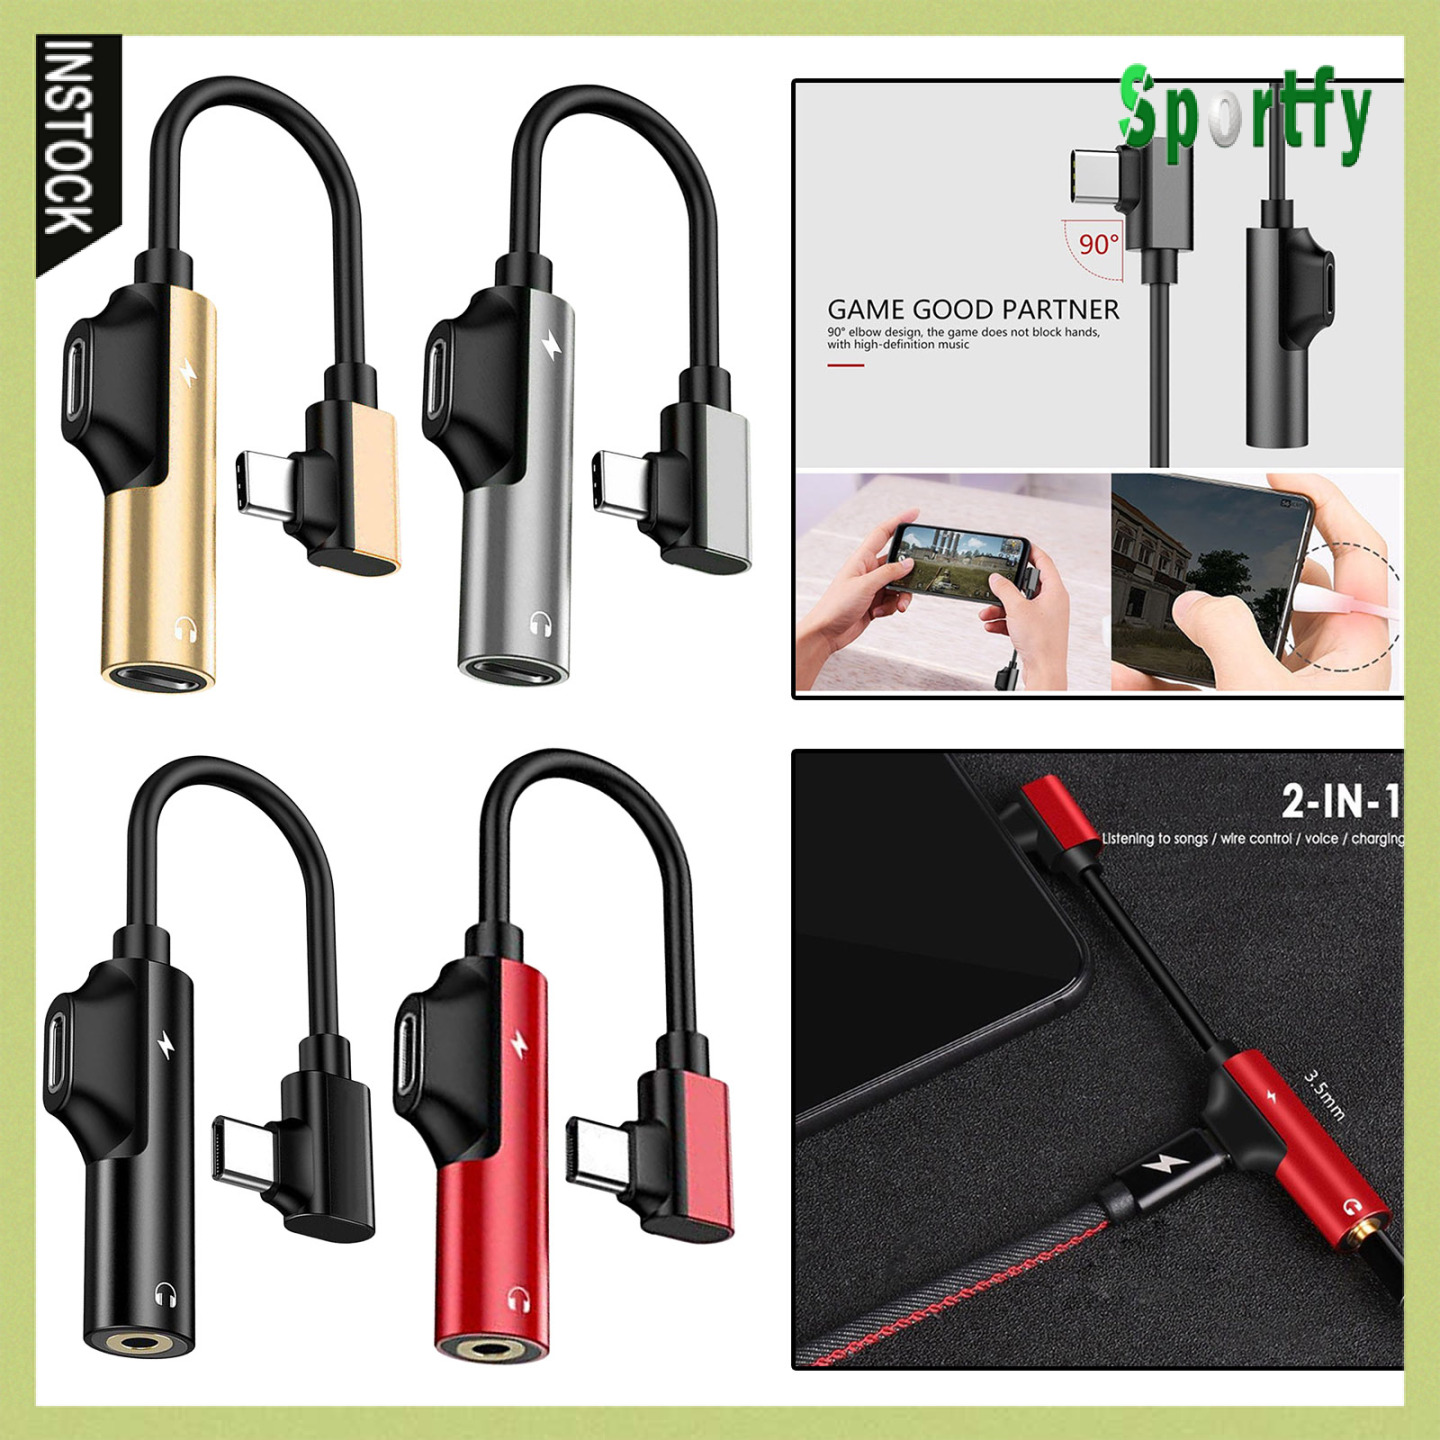 Sportfy 2-in-1 USB-C PD Headphone Jack Adapter for Aux Stereo Earphones